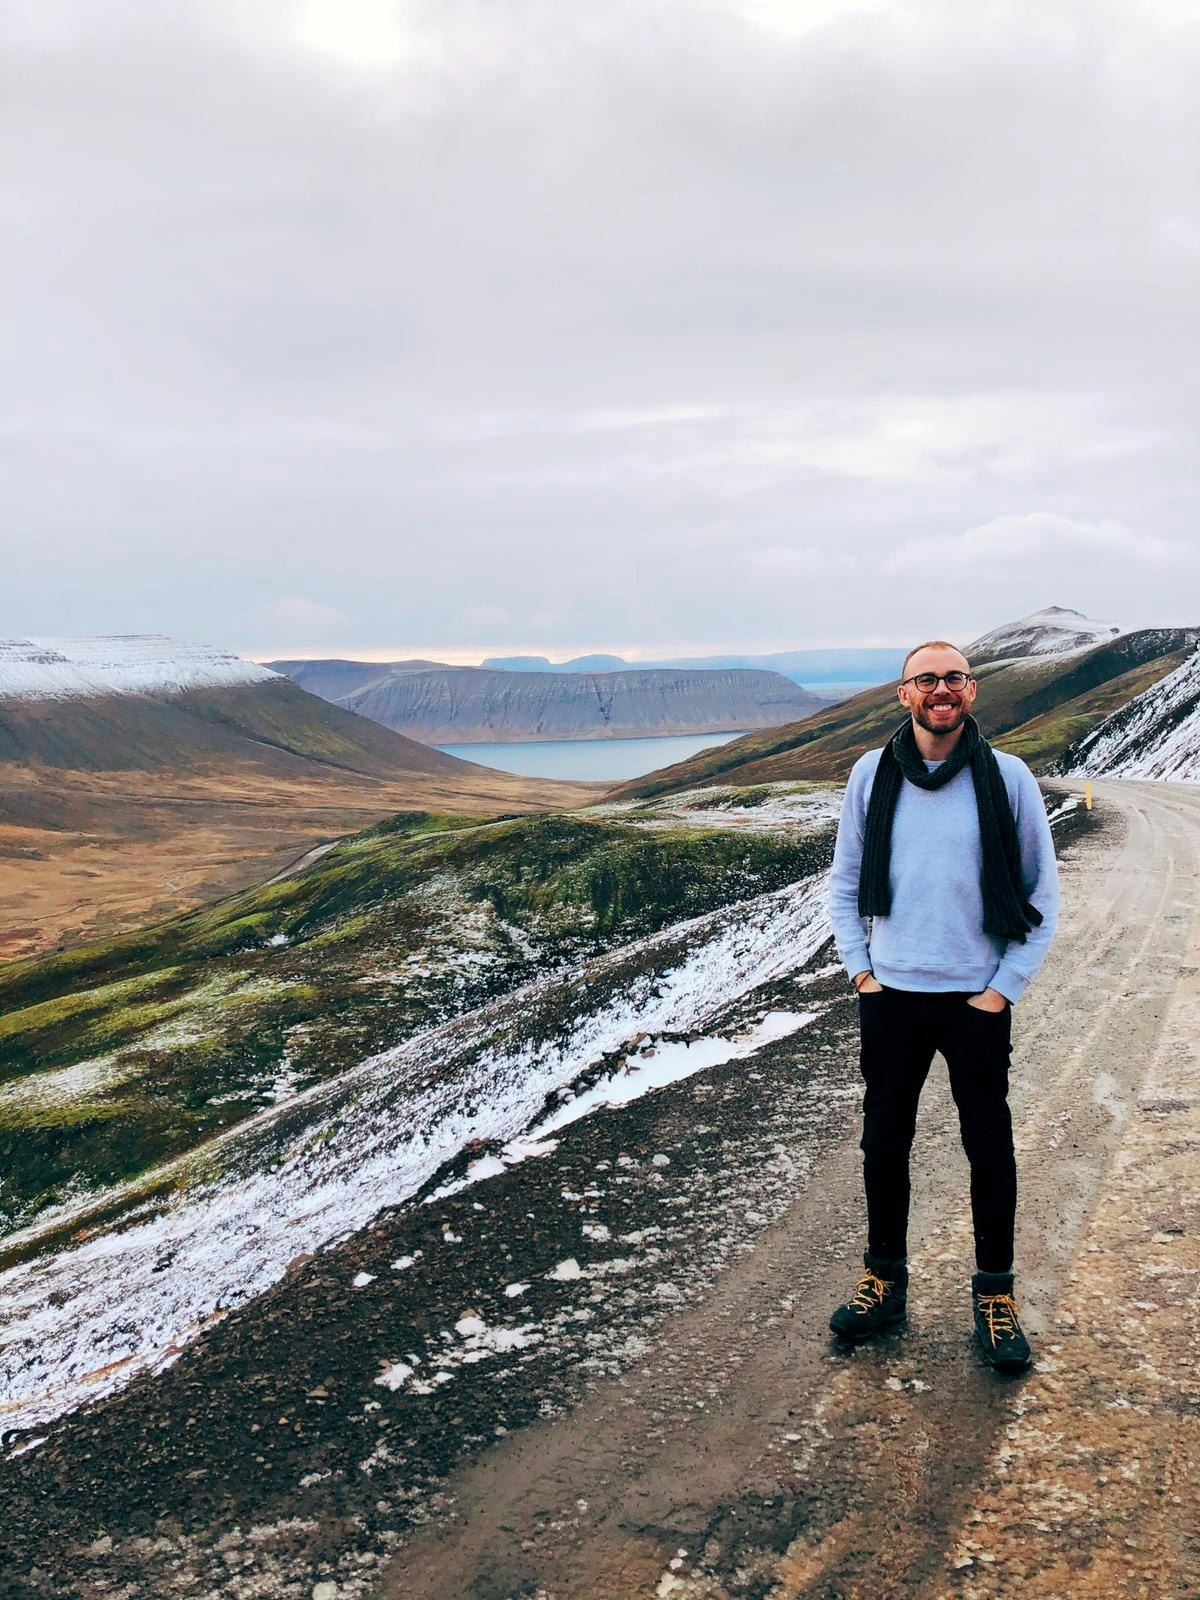 Writer Tom poses in front of mountainous, snowy Westfjords scenery in Iceland.